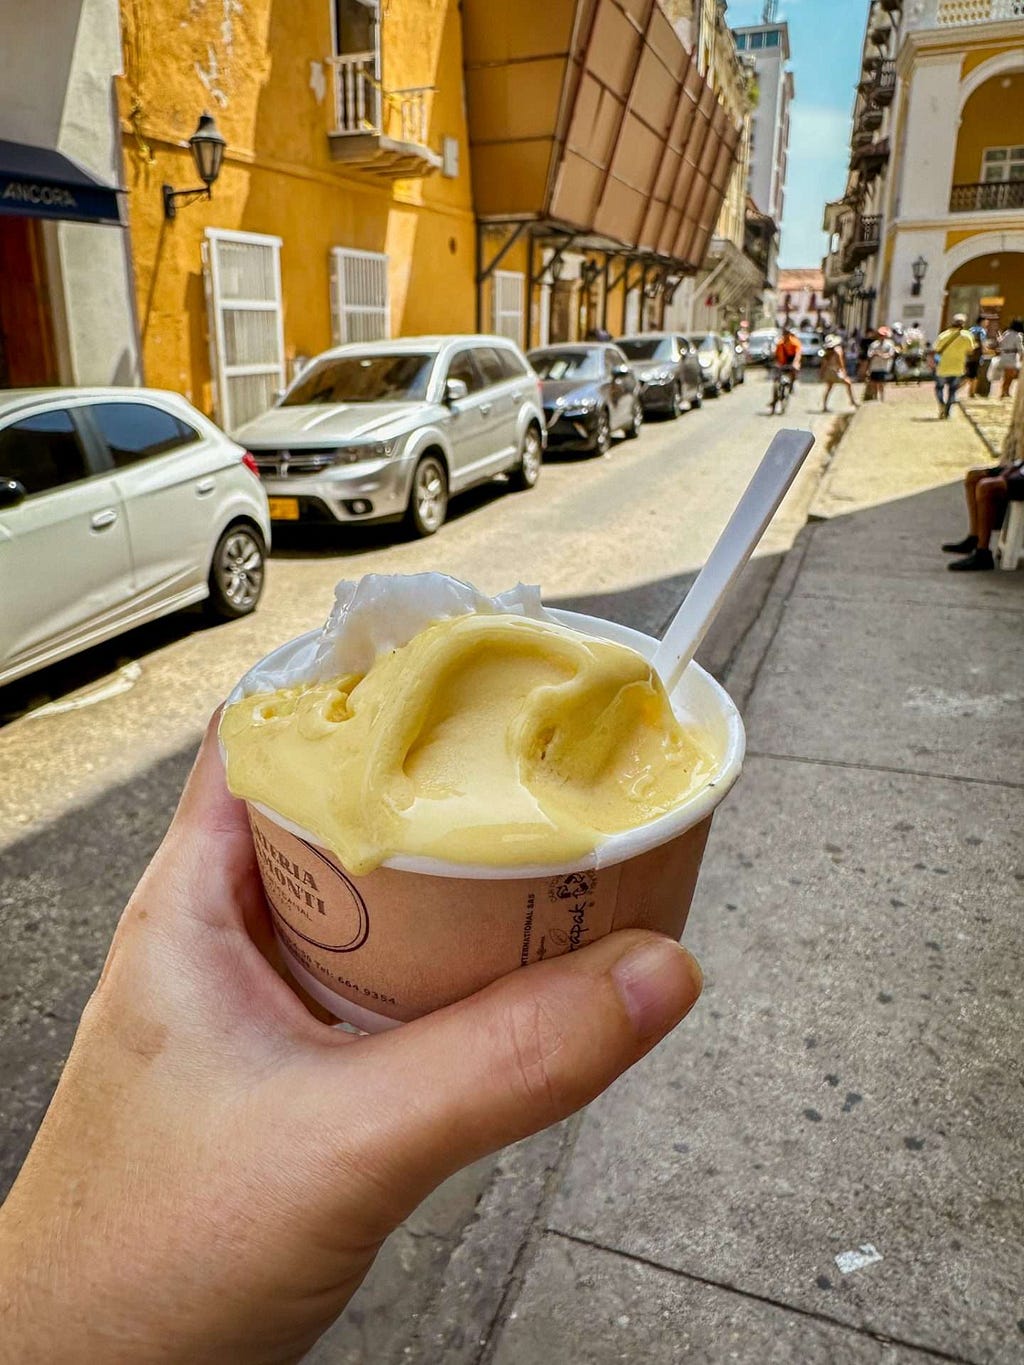 A hand holding a cup of passionfruit and coconut gelato with a white plastic spoon on a sunlit street in Cartagena, Colombia lined with parked cars and buildings.